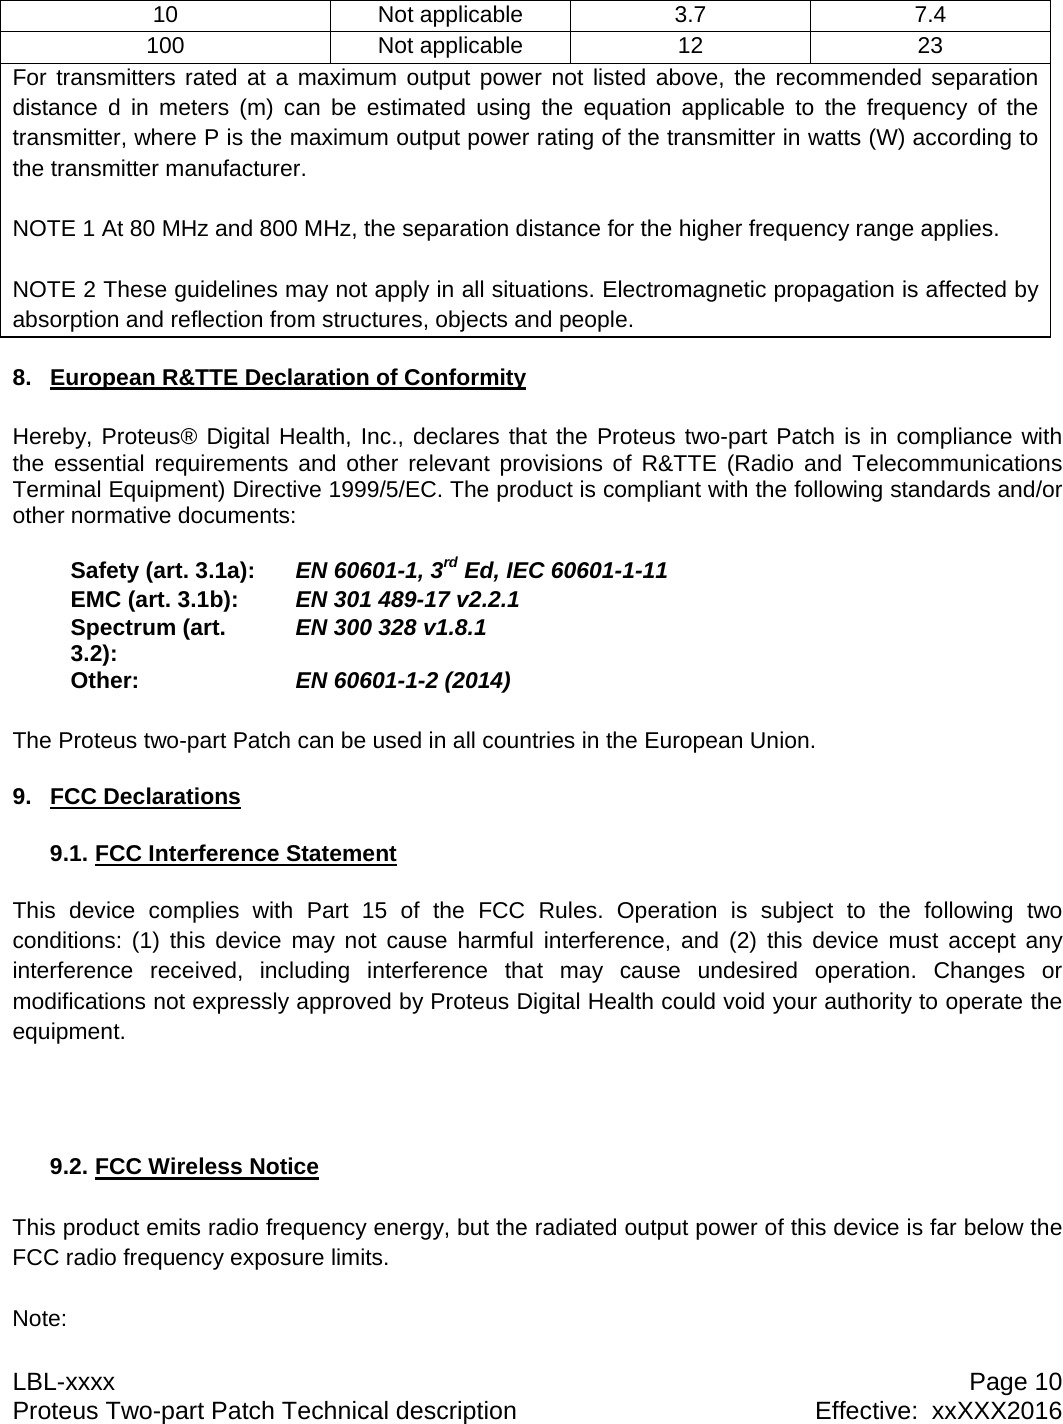 LBL-xxxx  Page 10 Proteus Two-part Patch Technical description  Effective:  xxXXX2016 10 Not applicable 3.7  7.4 100 Not applicable 12  23 For transmitters rated at a maximum output power not listed above, the recommended separation distance d in meters (m) can be estimated using the equation applicable to the frequency of the transmitter, where P is the maximum output power rating of the transmitter in watts (W) according to the transmitter manufacturer.  NOTE 1 At 80 MHz and 800 MHz, the separation distance for the higher frequency range applies.  NOTE 2 These guidelines may not apply in all situations. Electromagnetic propagation is affected by absorption and reflection from structures, objects and people.  8.  European R&amp;TTE Declaration of Conformity  Hereby, Proteus® Digital Health, Inc., declares that the Proteus two-part Patch is in compliance with the essential requirements and other relevant provisions of R&amp;TTE (Radio and Telecommunications Terminal Equipment) Directive 1999/5/EC. The product is compliant with the following standards and/or other normative documents:Safety (art. 3.1a):  EN 60601-1, 3rd Ed, IEC 60601-1-11EMC (art. 3.1b):  EN 301 489-17 v2.2.1Spectrum (art. 3.2):  EN 300 328 v1.8.1Other:  EN 60601-1-2 (2014) The Proteus two-part Patch can be used in all countries in the European Union.  9. FCC Declarations  9.1. FCC Interference Statement   This device complies with Part 15 of the FCC Rules. Operation is subject to the following two conditions: (1) this device may not cause harmful interference, and (2) this device must accept any interference received, including interference that may cause undesired operation. Changes or modifications not expressly approved by Proteus Digital Health could void your authority to operate the equipment.     9.2. FCC Wireless Notice   This product emits radio frequency energy, but the radiated output power of this device is far below the FCC radio frequency exposure limits.   Note: 